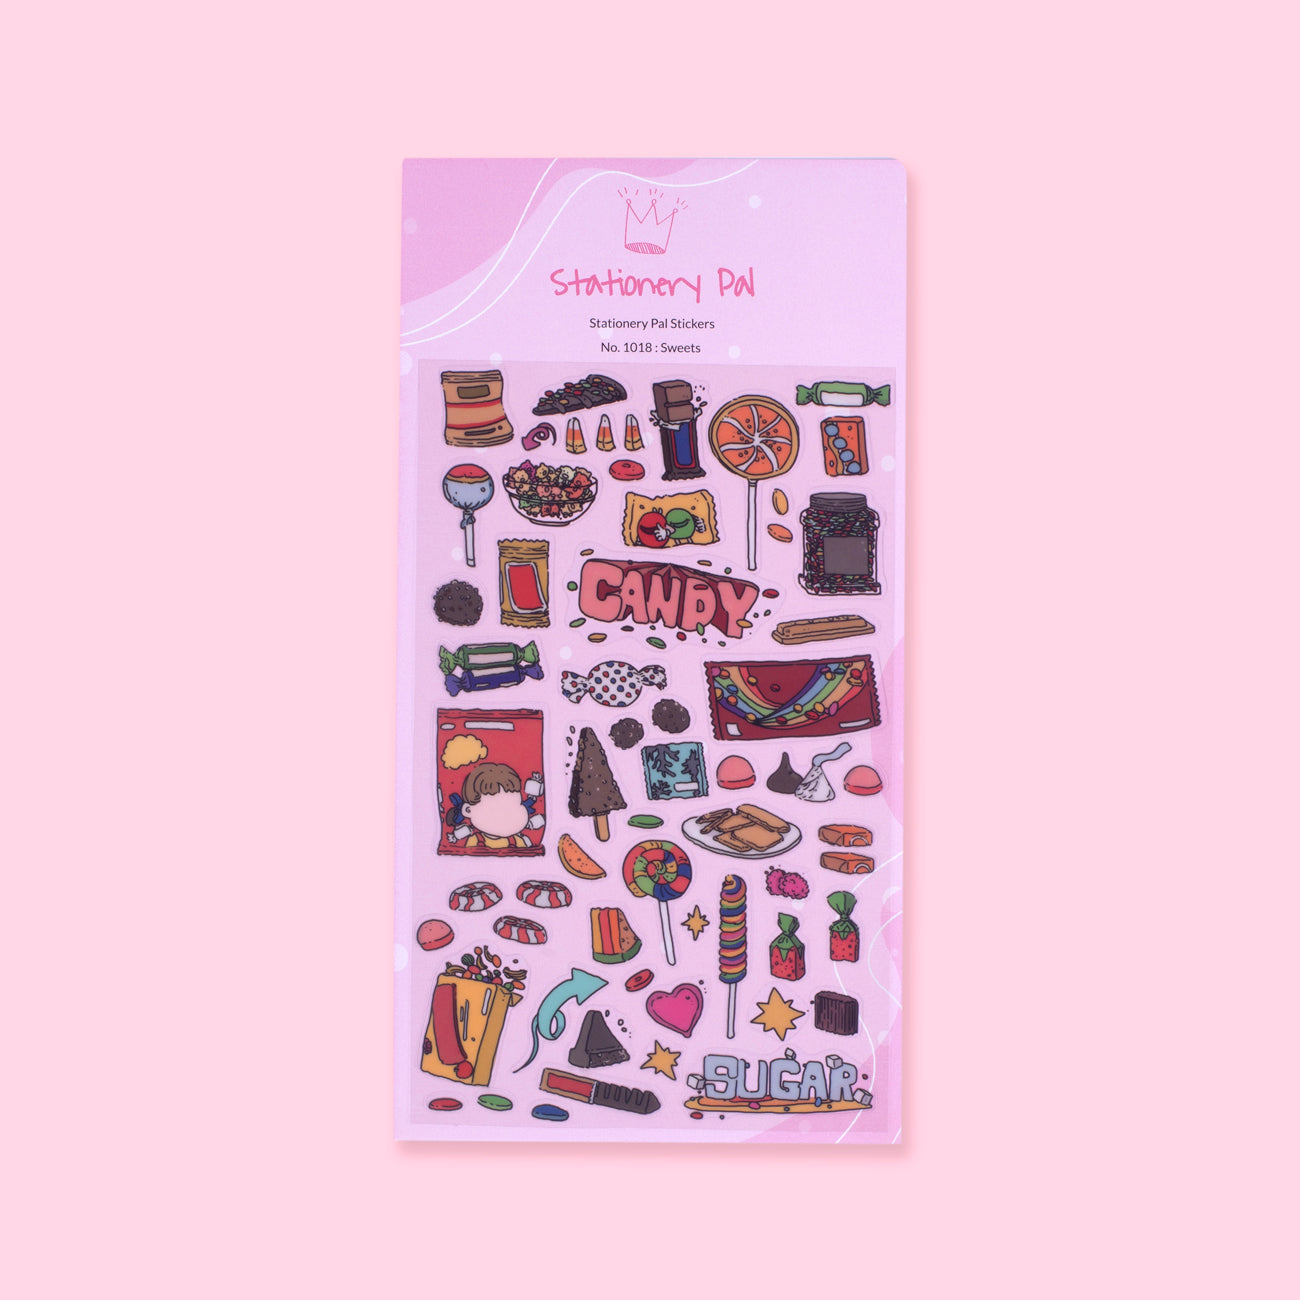 Stationery Pal Original Stickers - Sweets